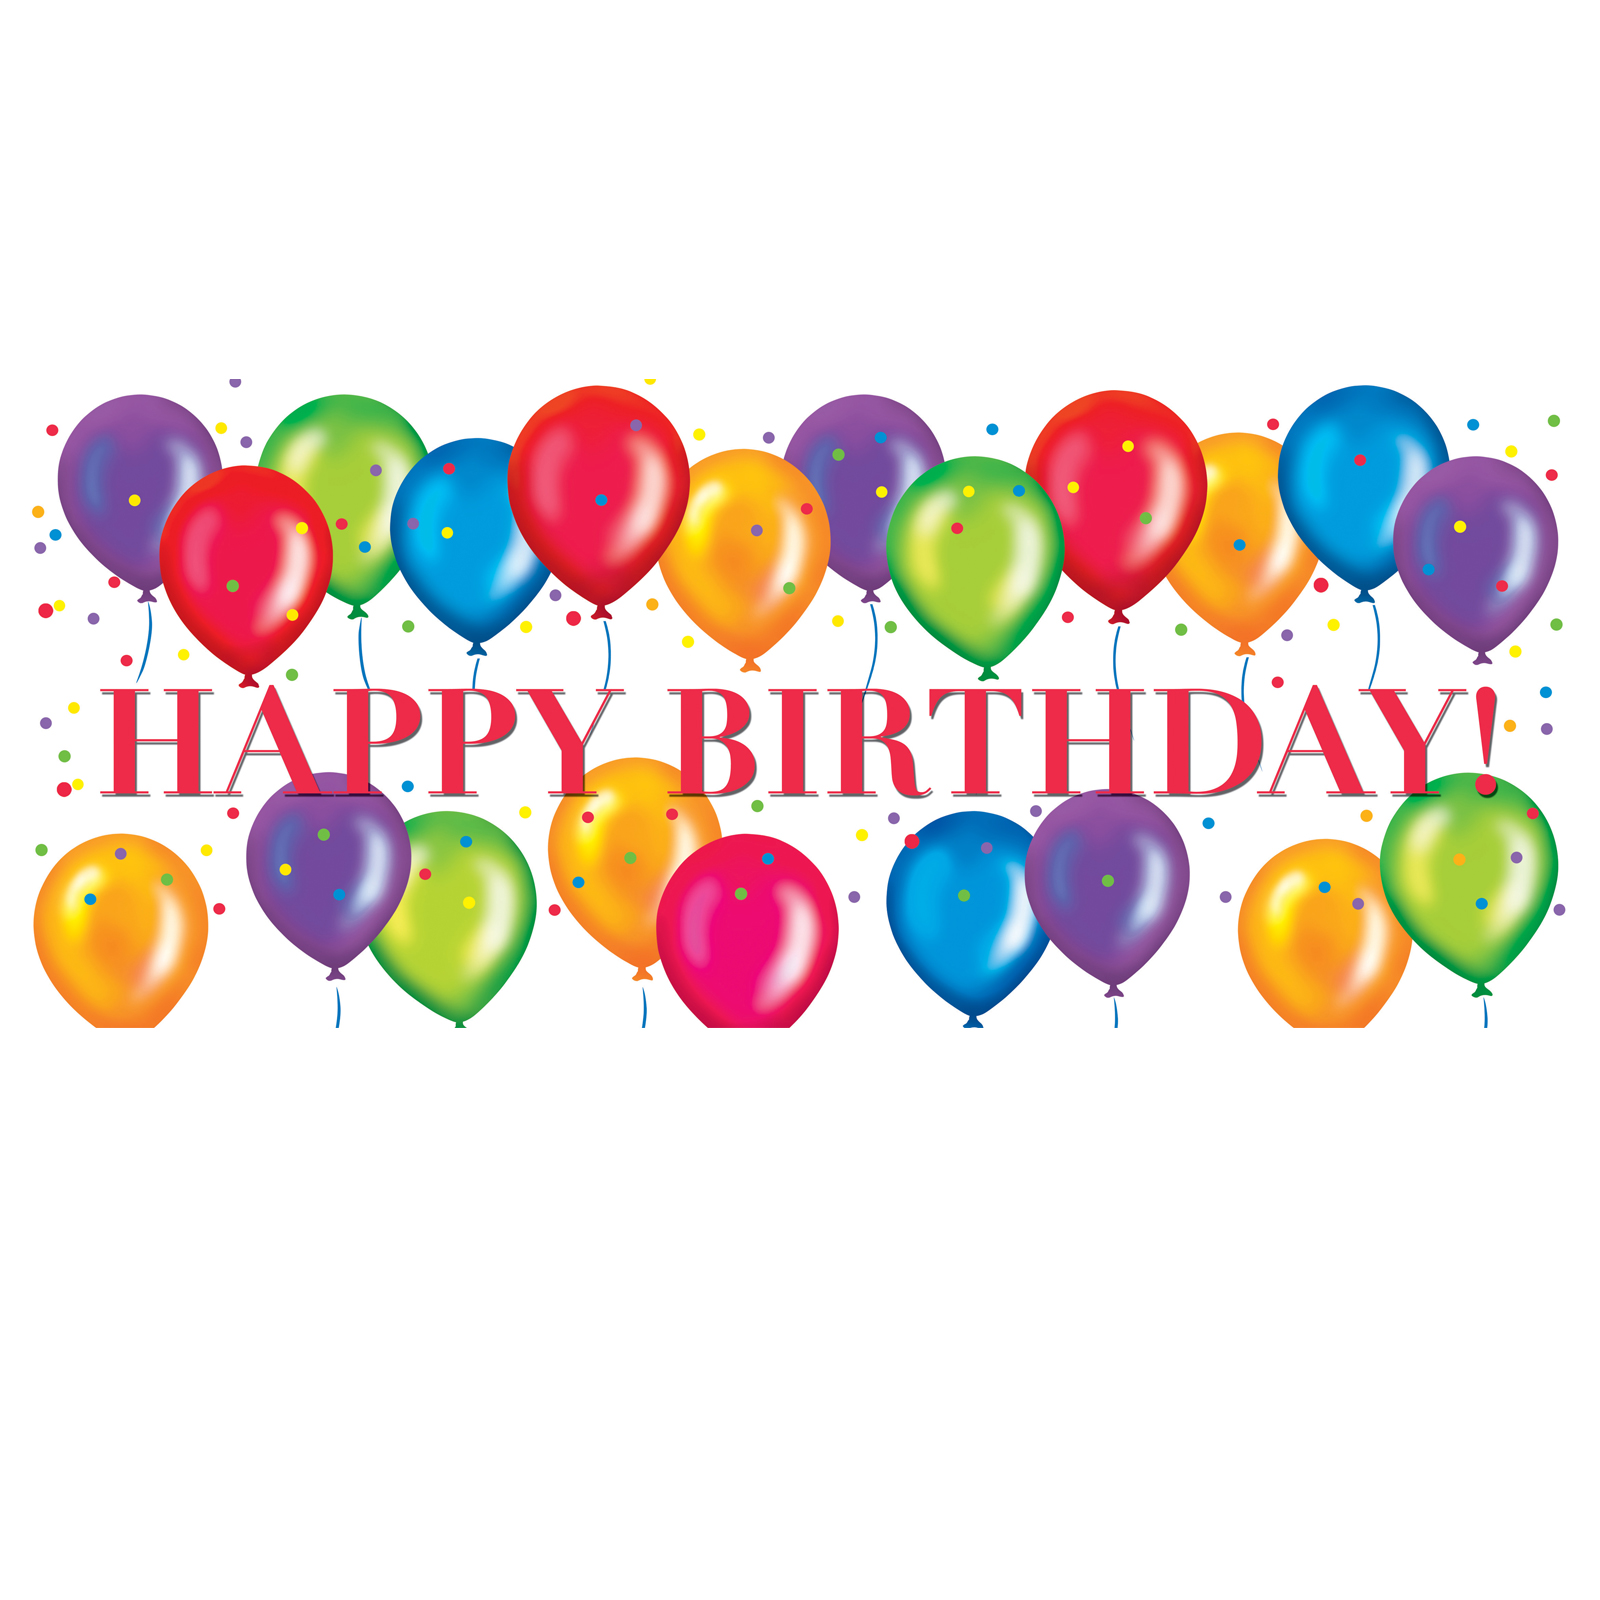 Happy 40th Birthday Wishes - ClipArt Best